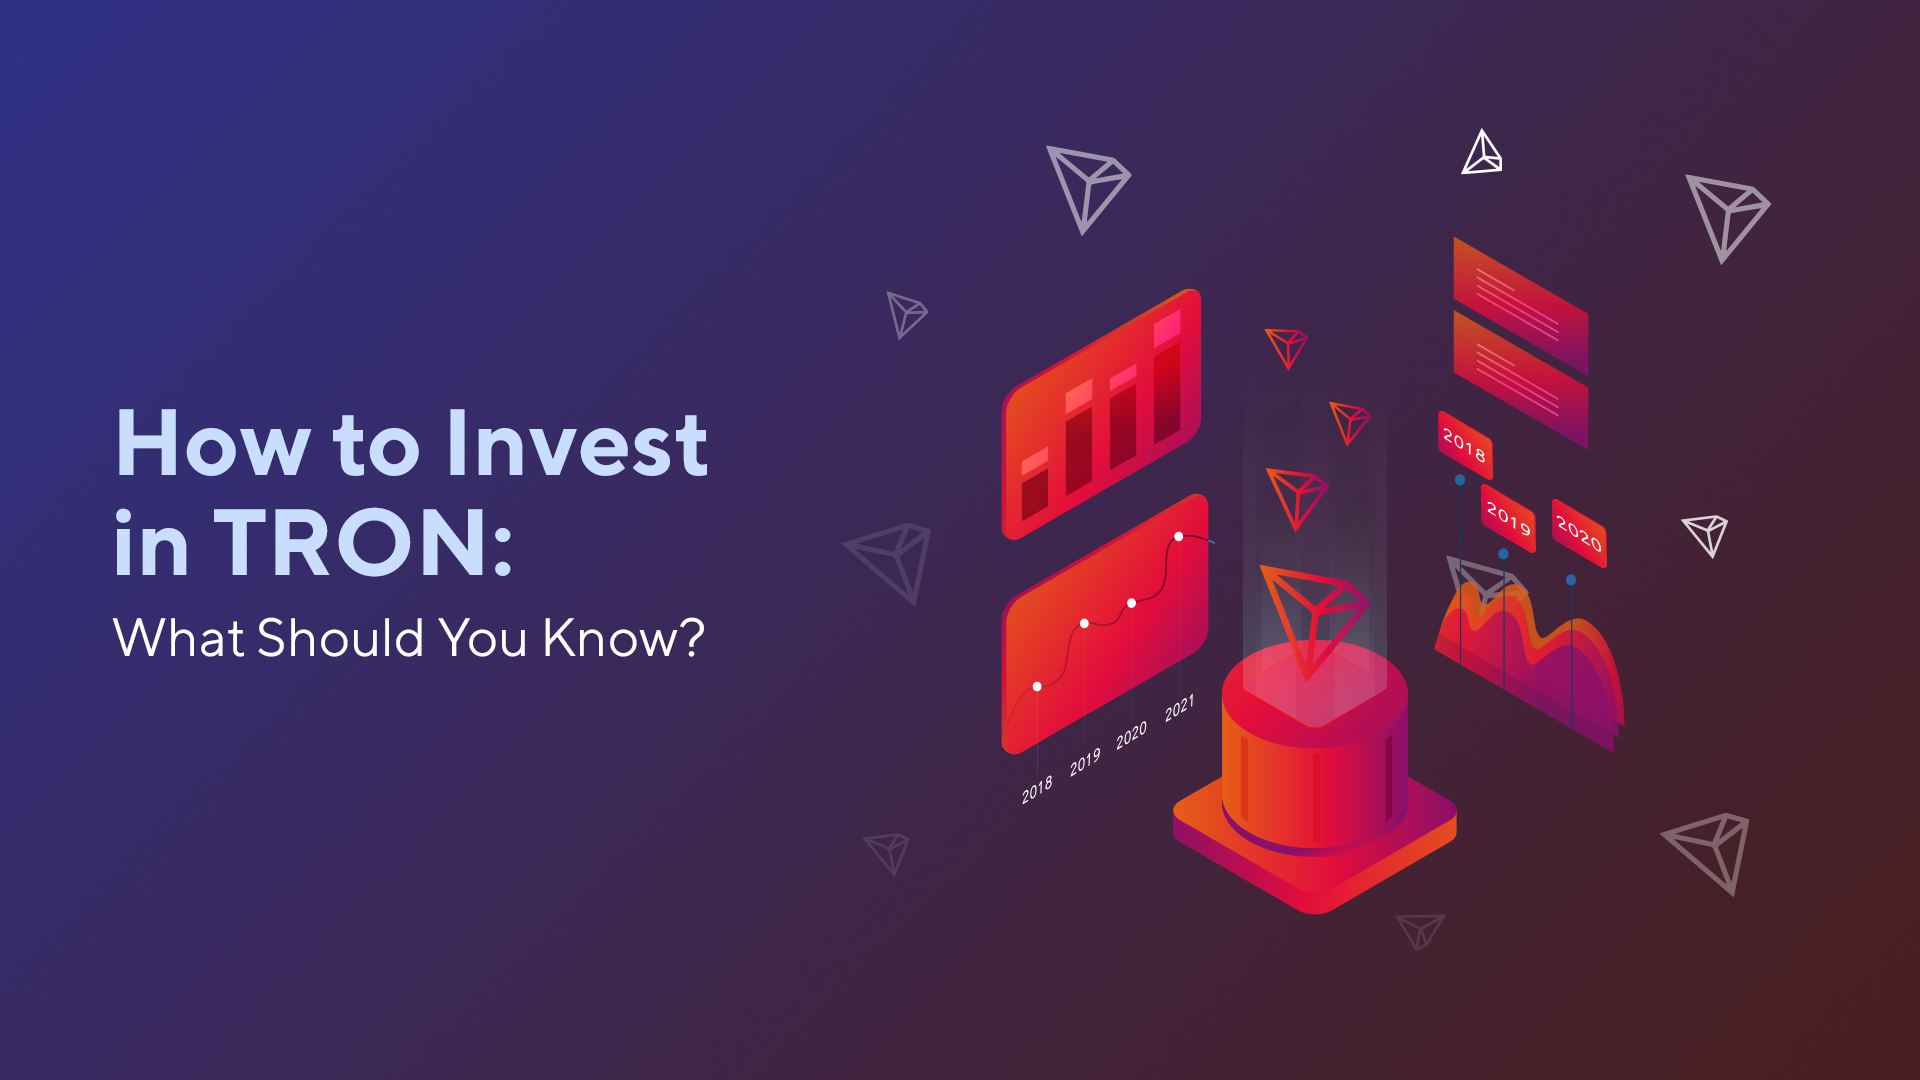 Tron (TRX) Crypto – What It Is and Is It a Good Investment?